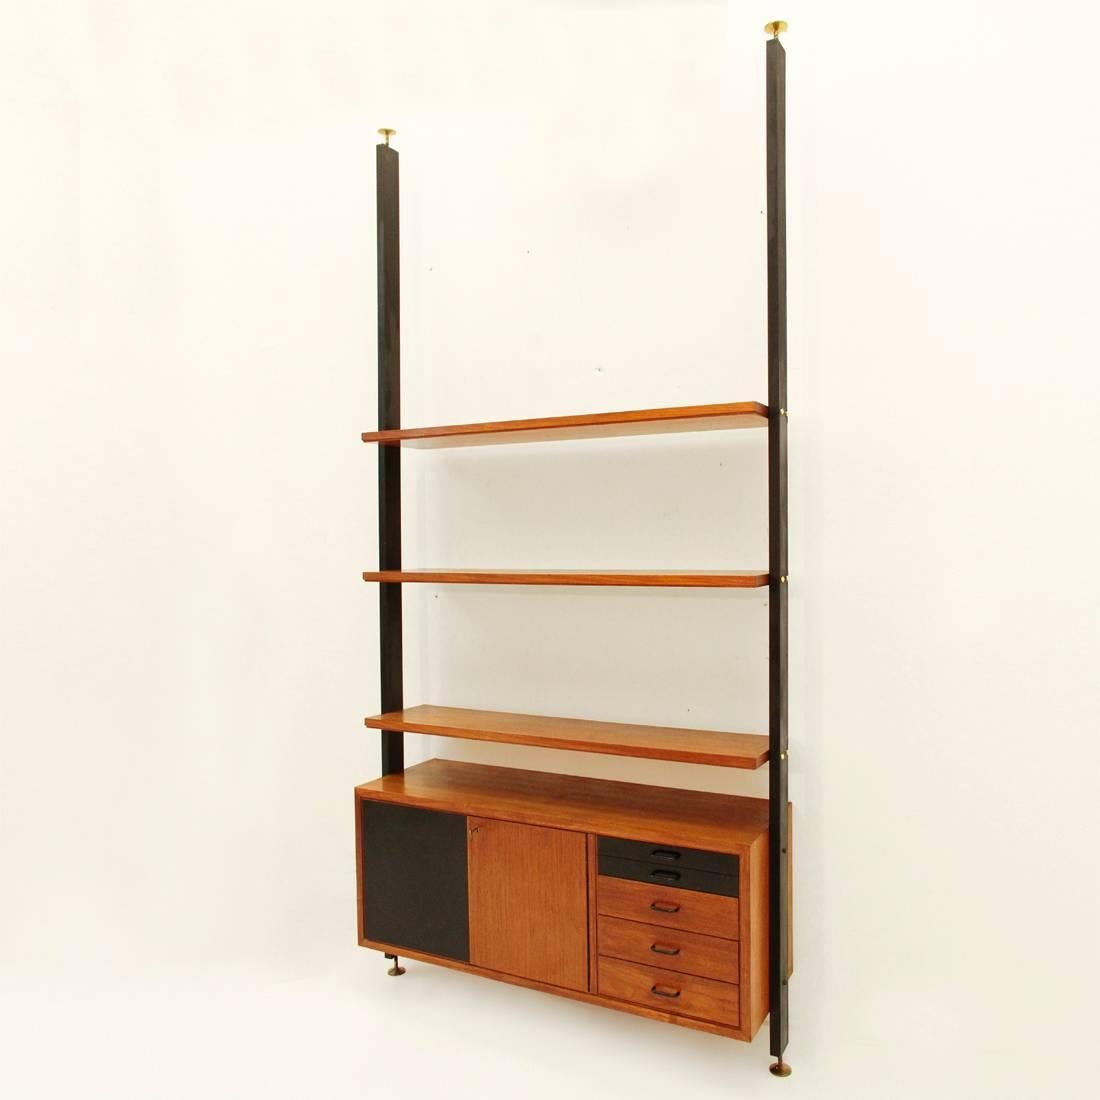 Bookshelf manufactured in the 1960s. It features iron uprights and wooden elements with a teak veneer. This single module bookshelf consists of three shelves and wall cabinet with two doors and four drawers. Fair vintage condition, defects and signs